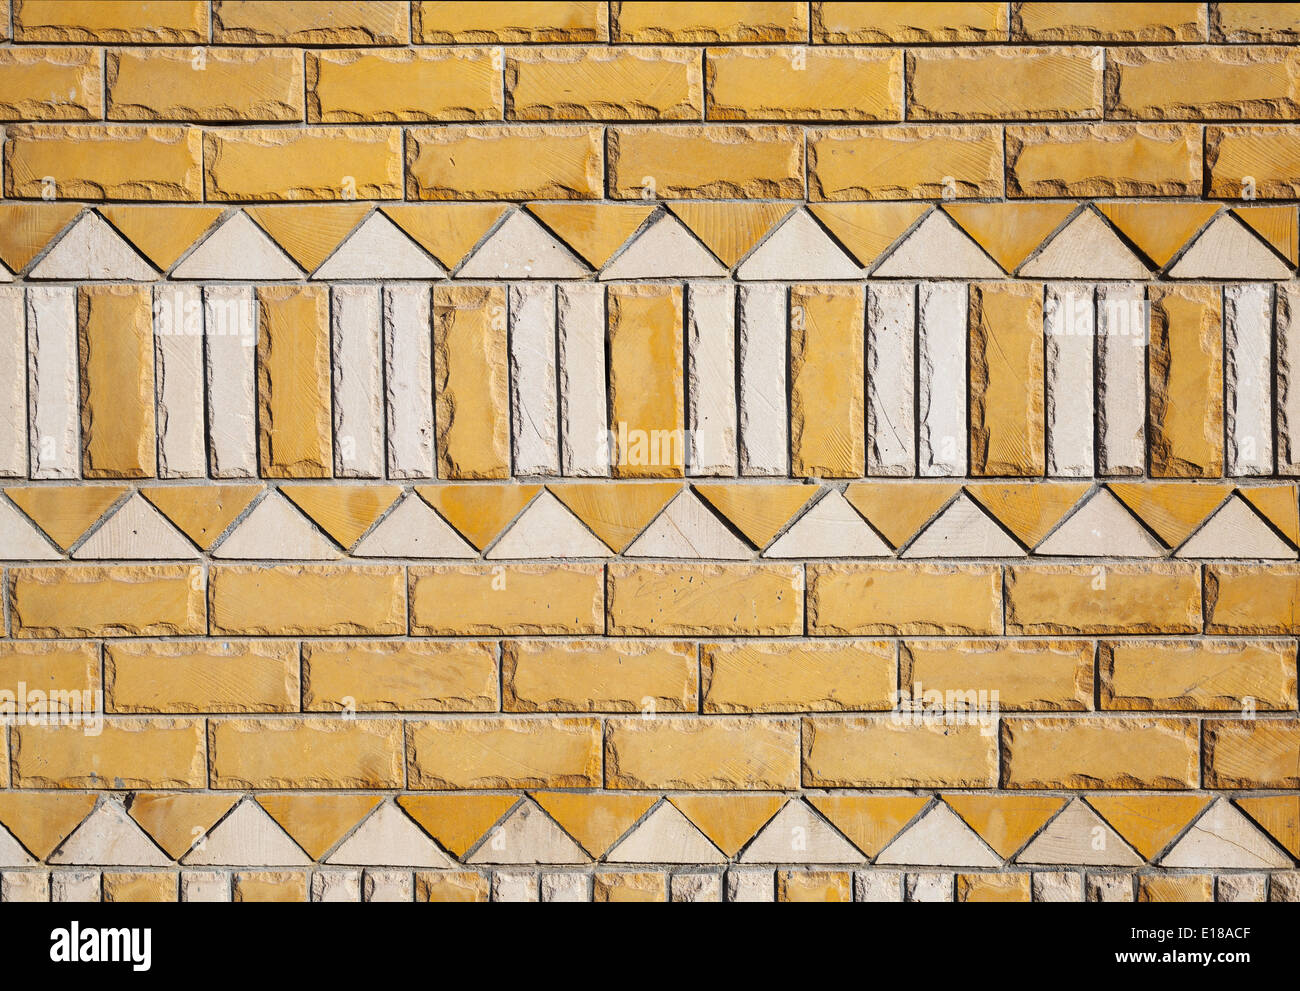 Yellow brick wall texture with white ornament pattern Stock Photo